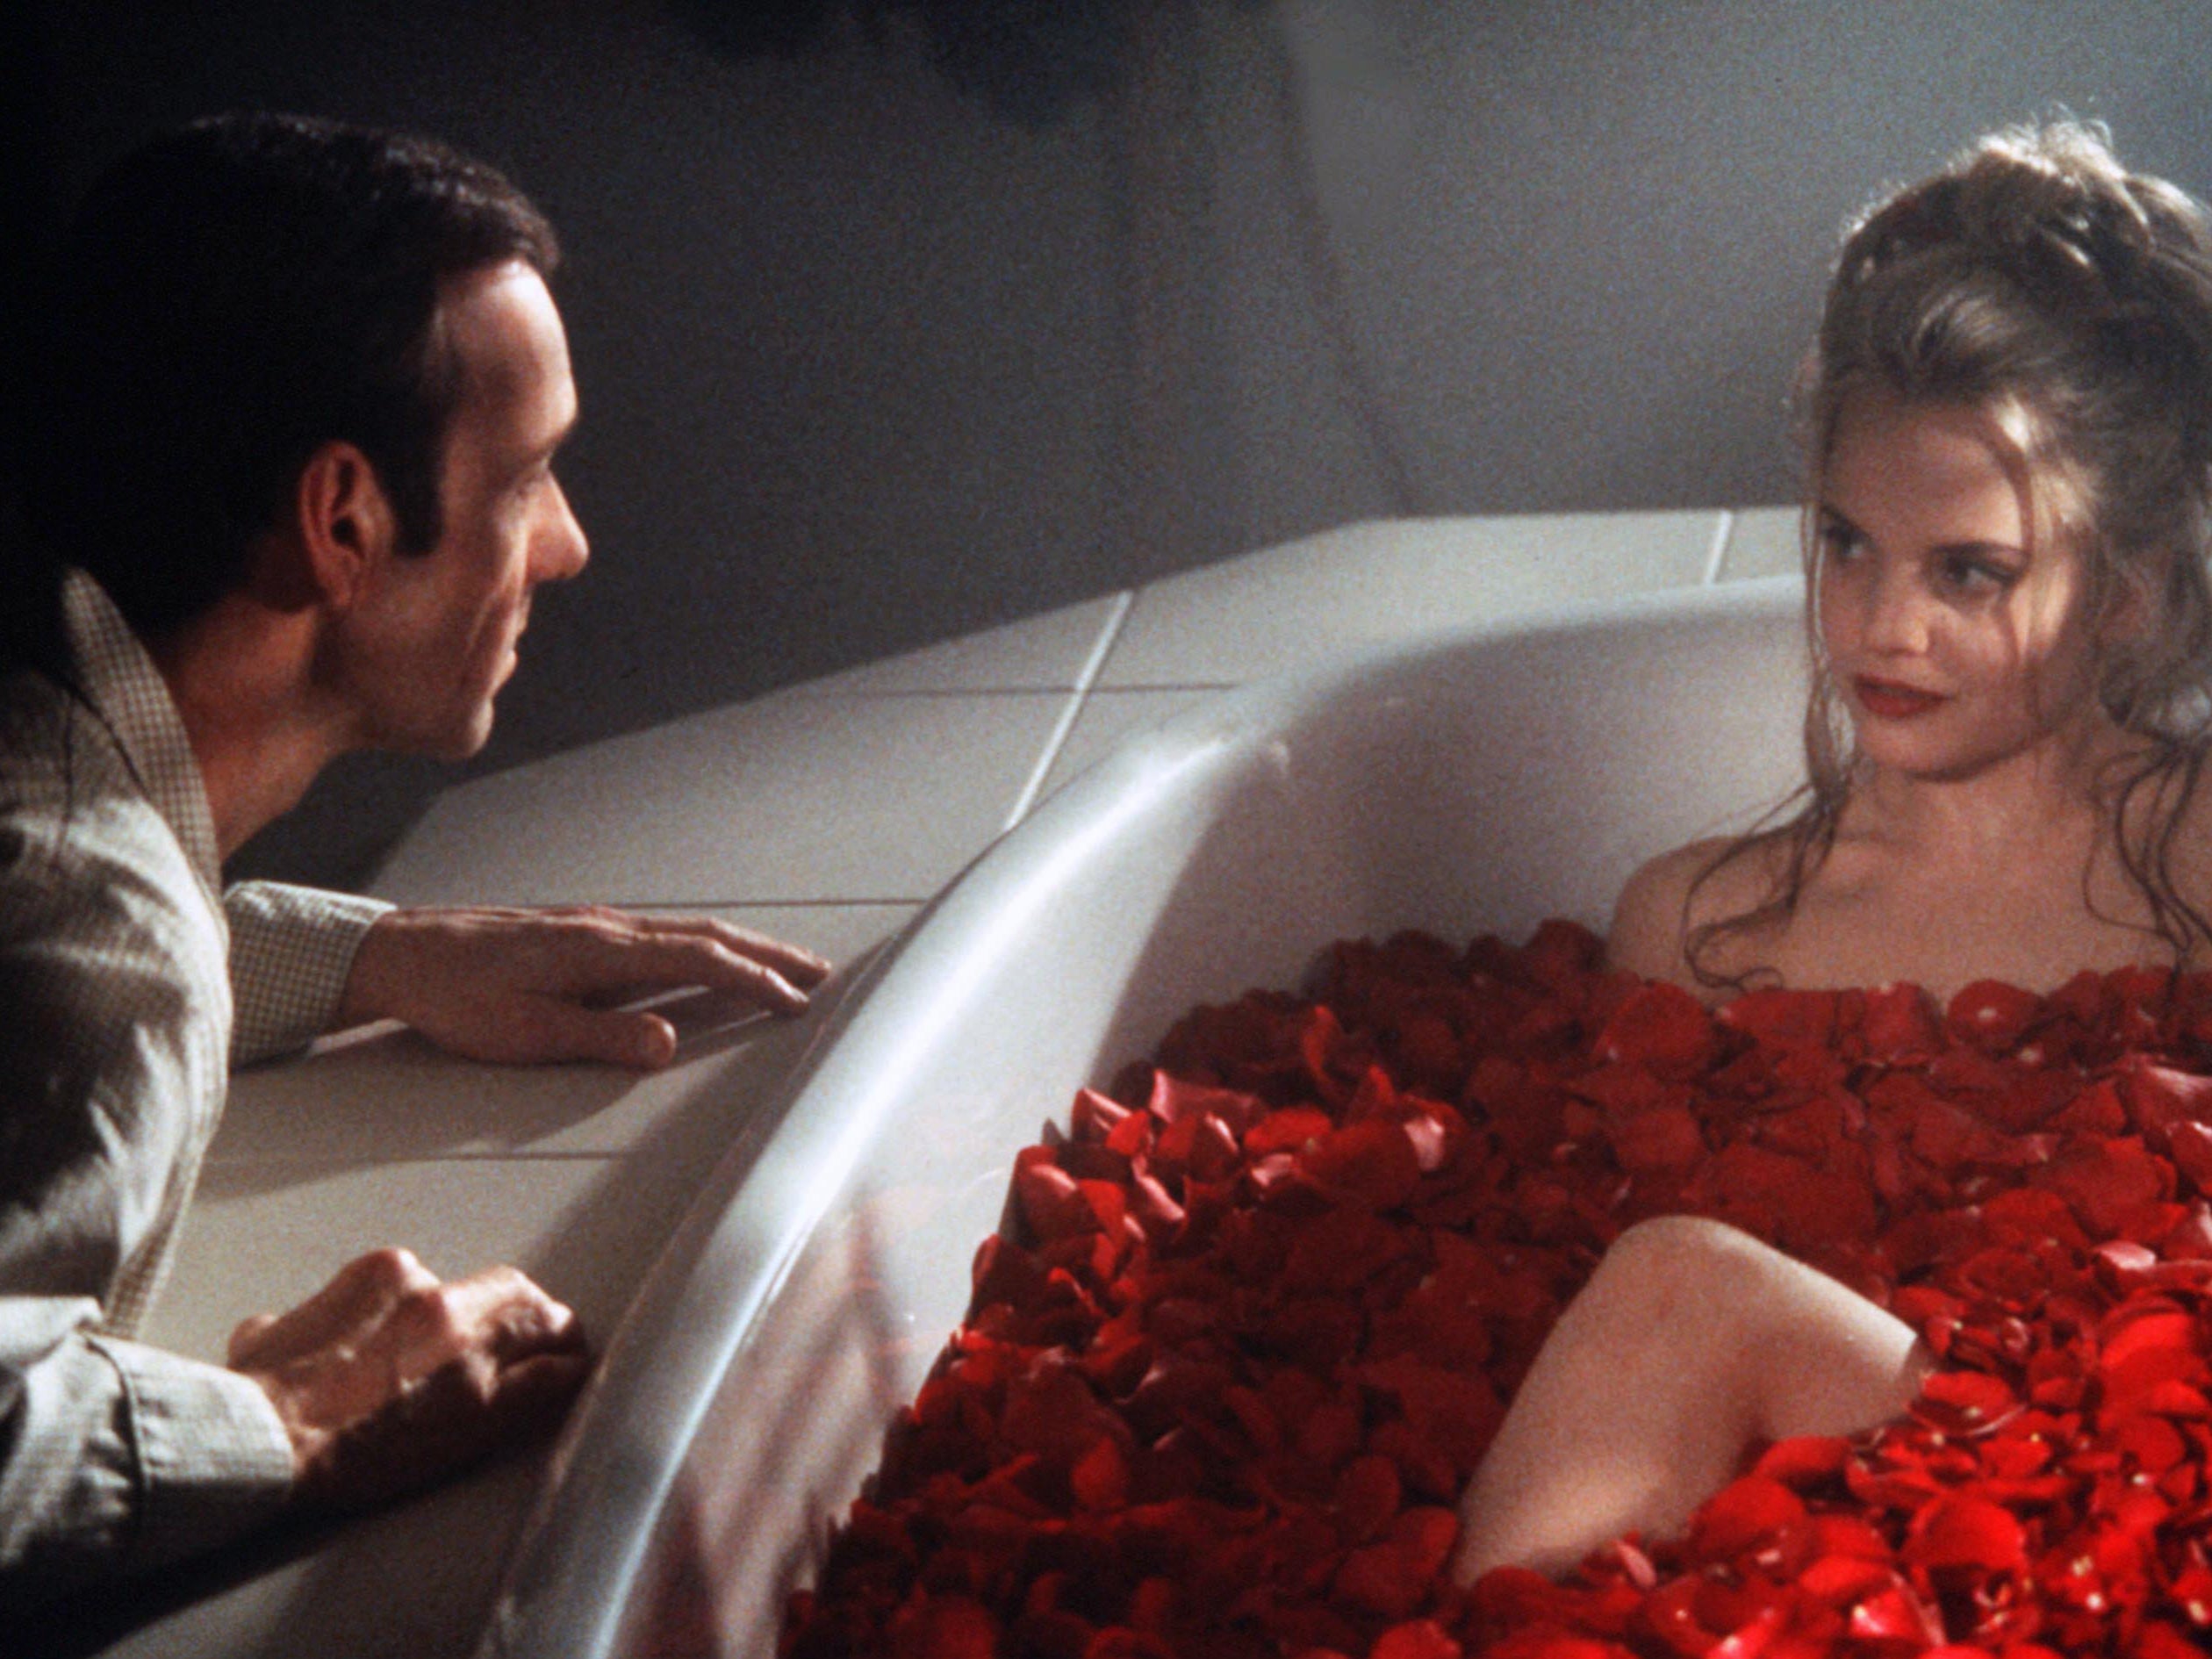 Kevin Spacey and Mena Suvari in ‘American Beauty’